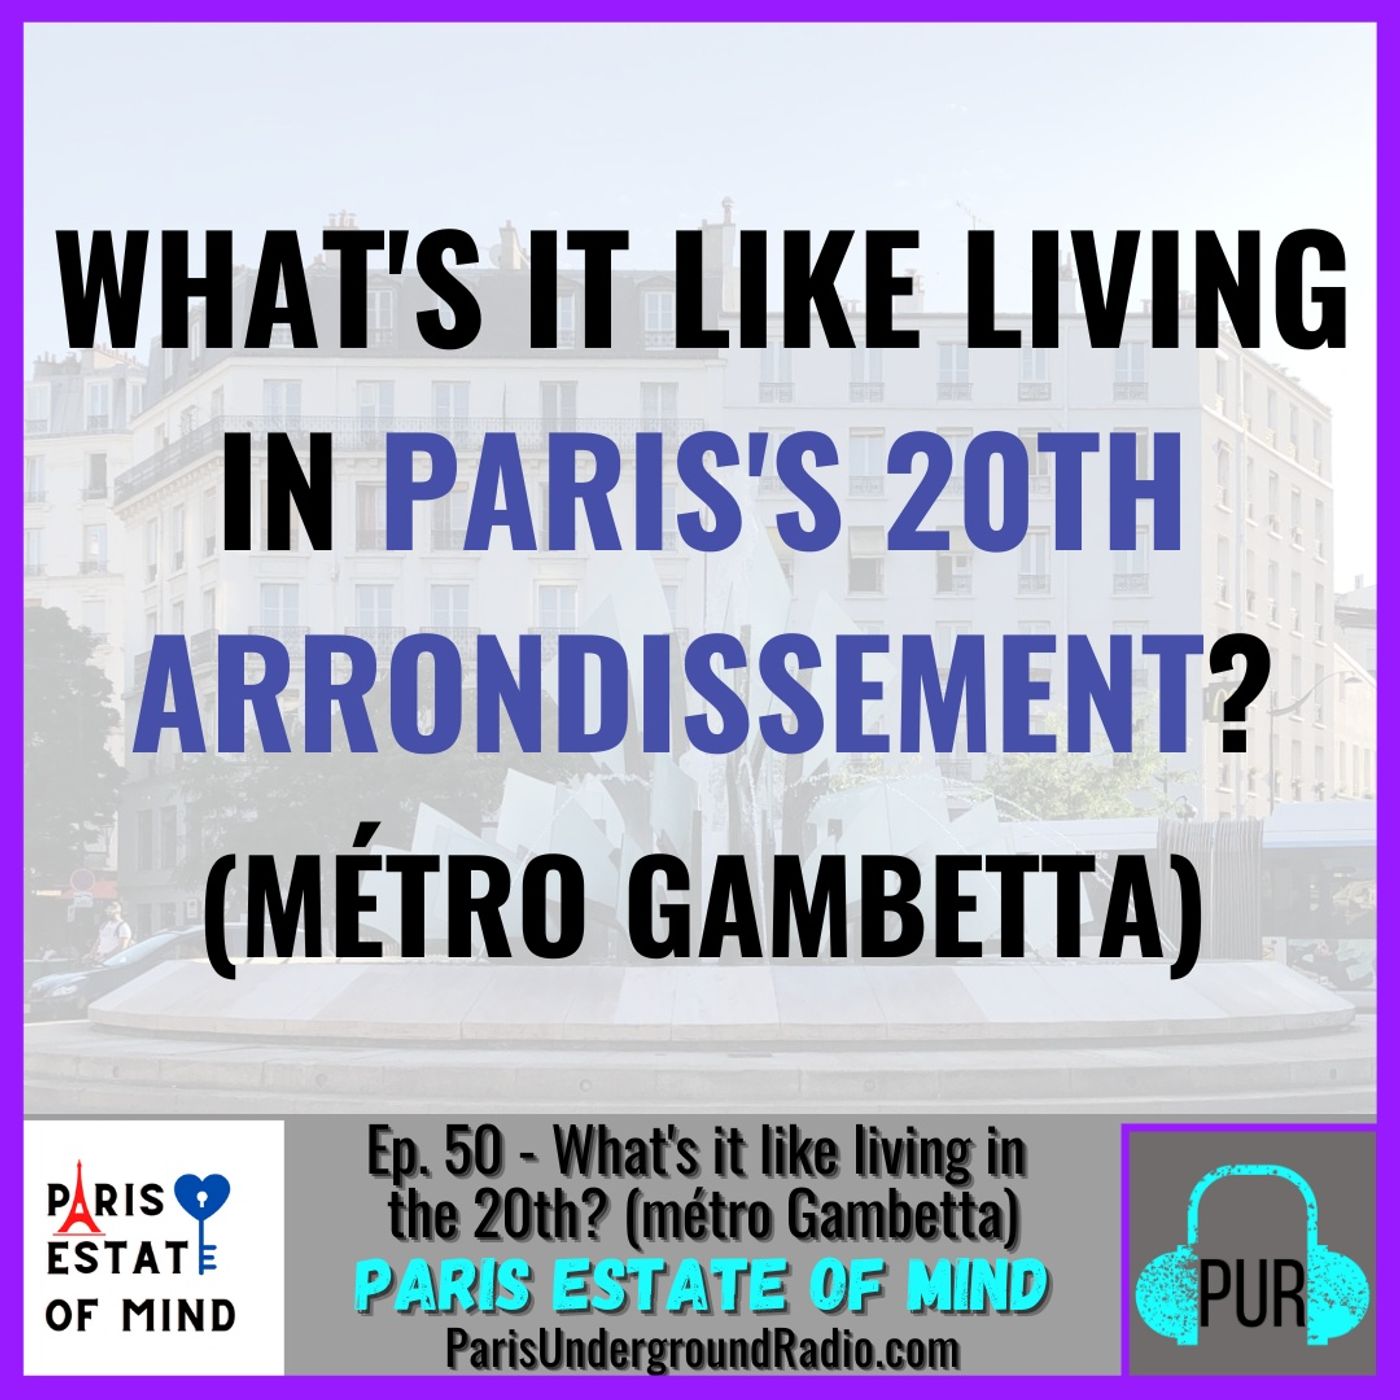 What's it like living in the 20th? (métro Gambetta)